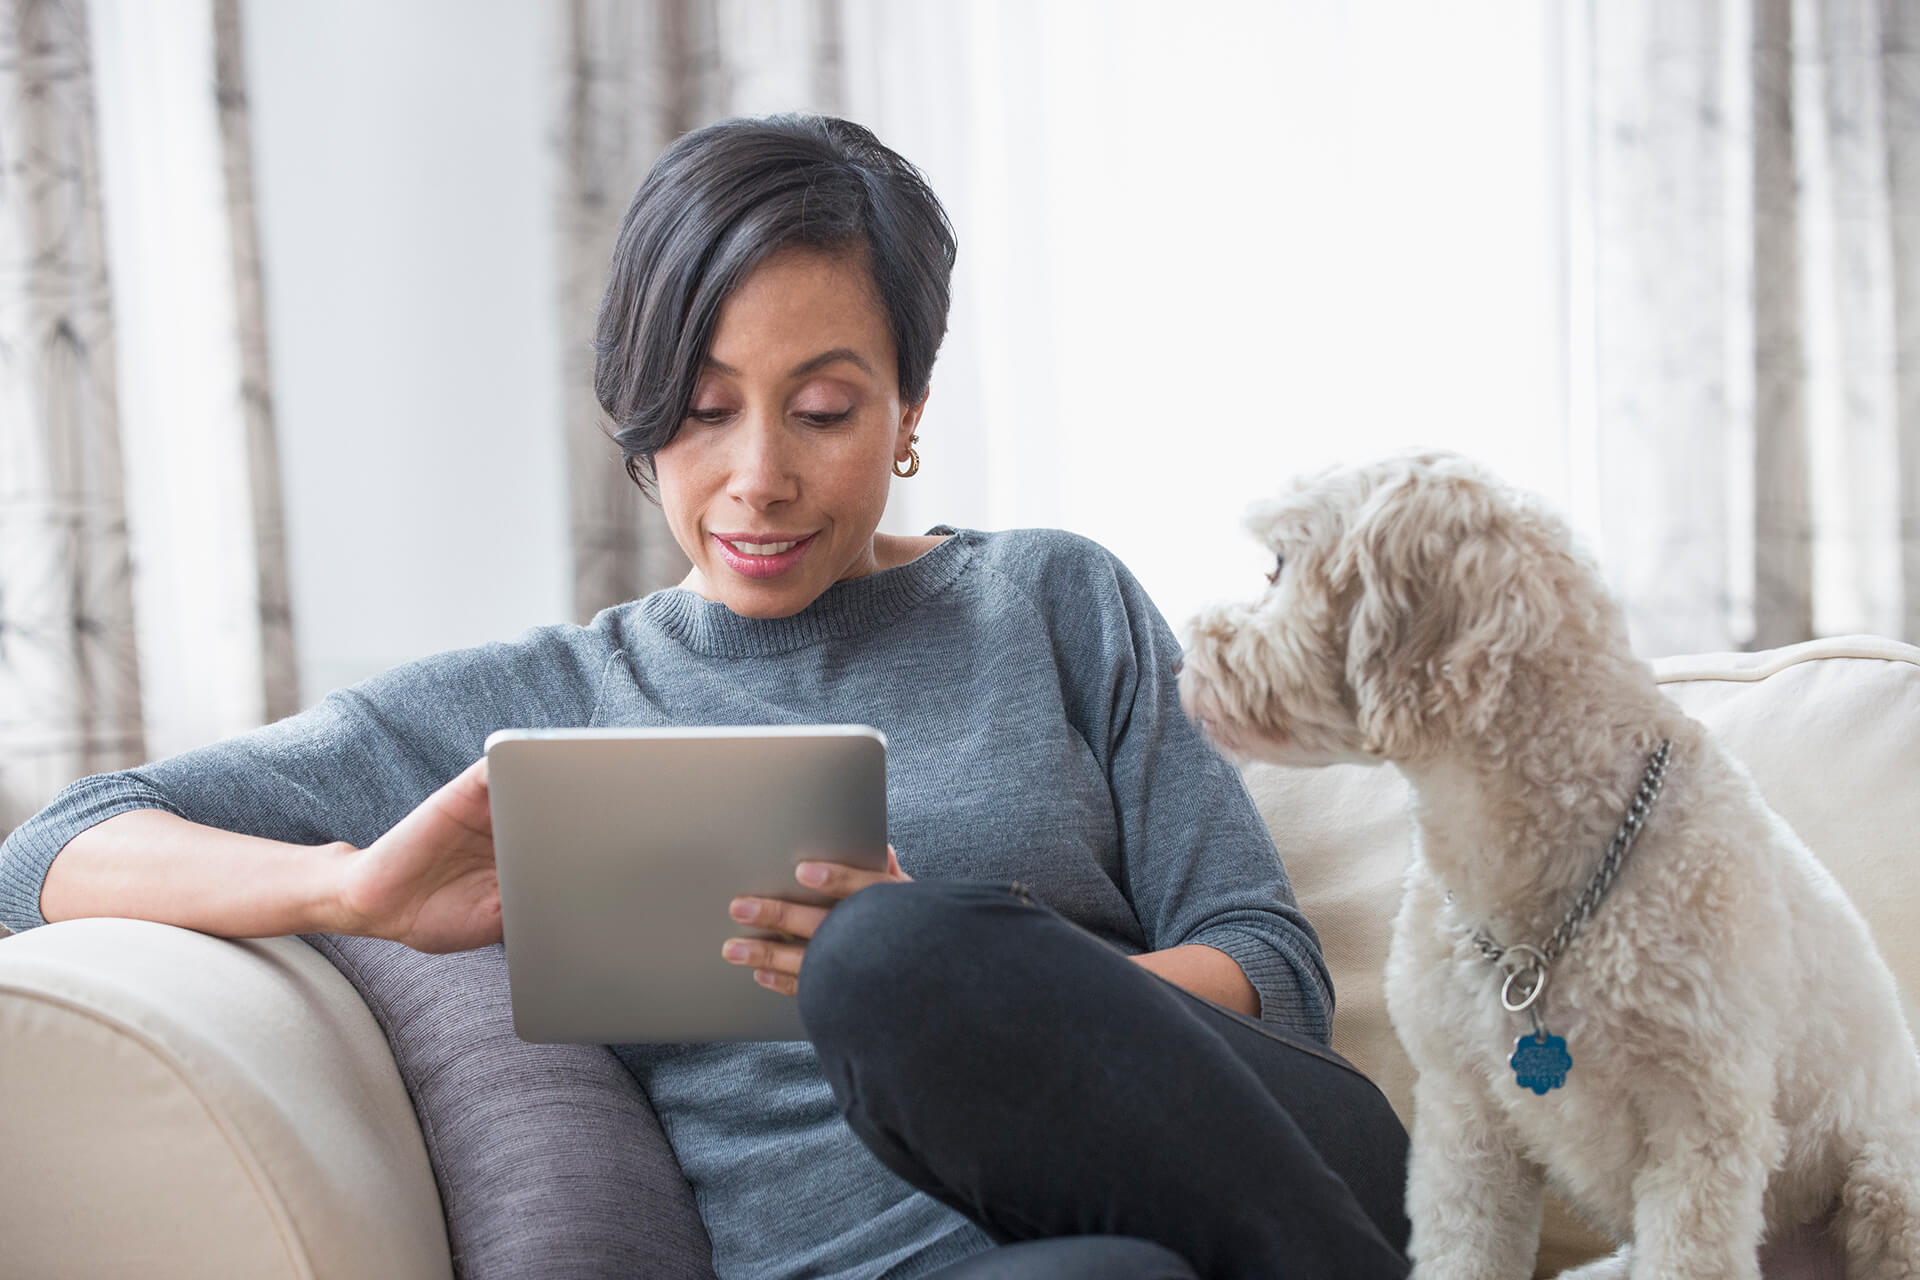 Photo of woman sitting on couch on an ipad